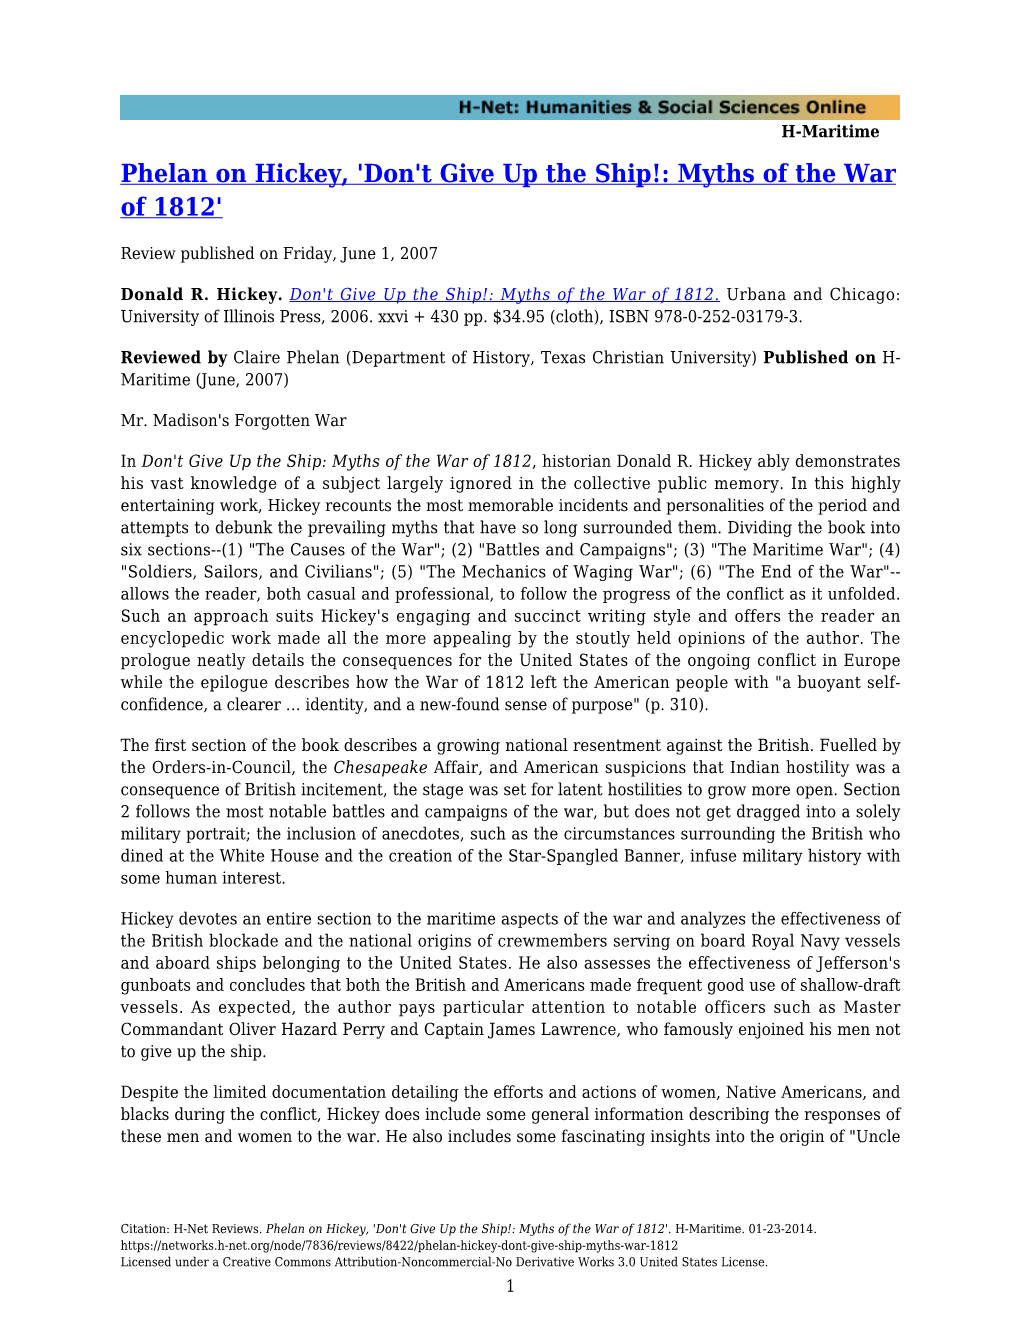 Phelan on Hickey, 'Don't Give up the Ship!: Myths of the War of 1812'